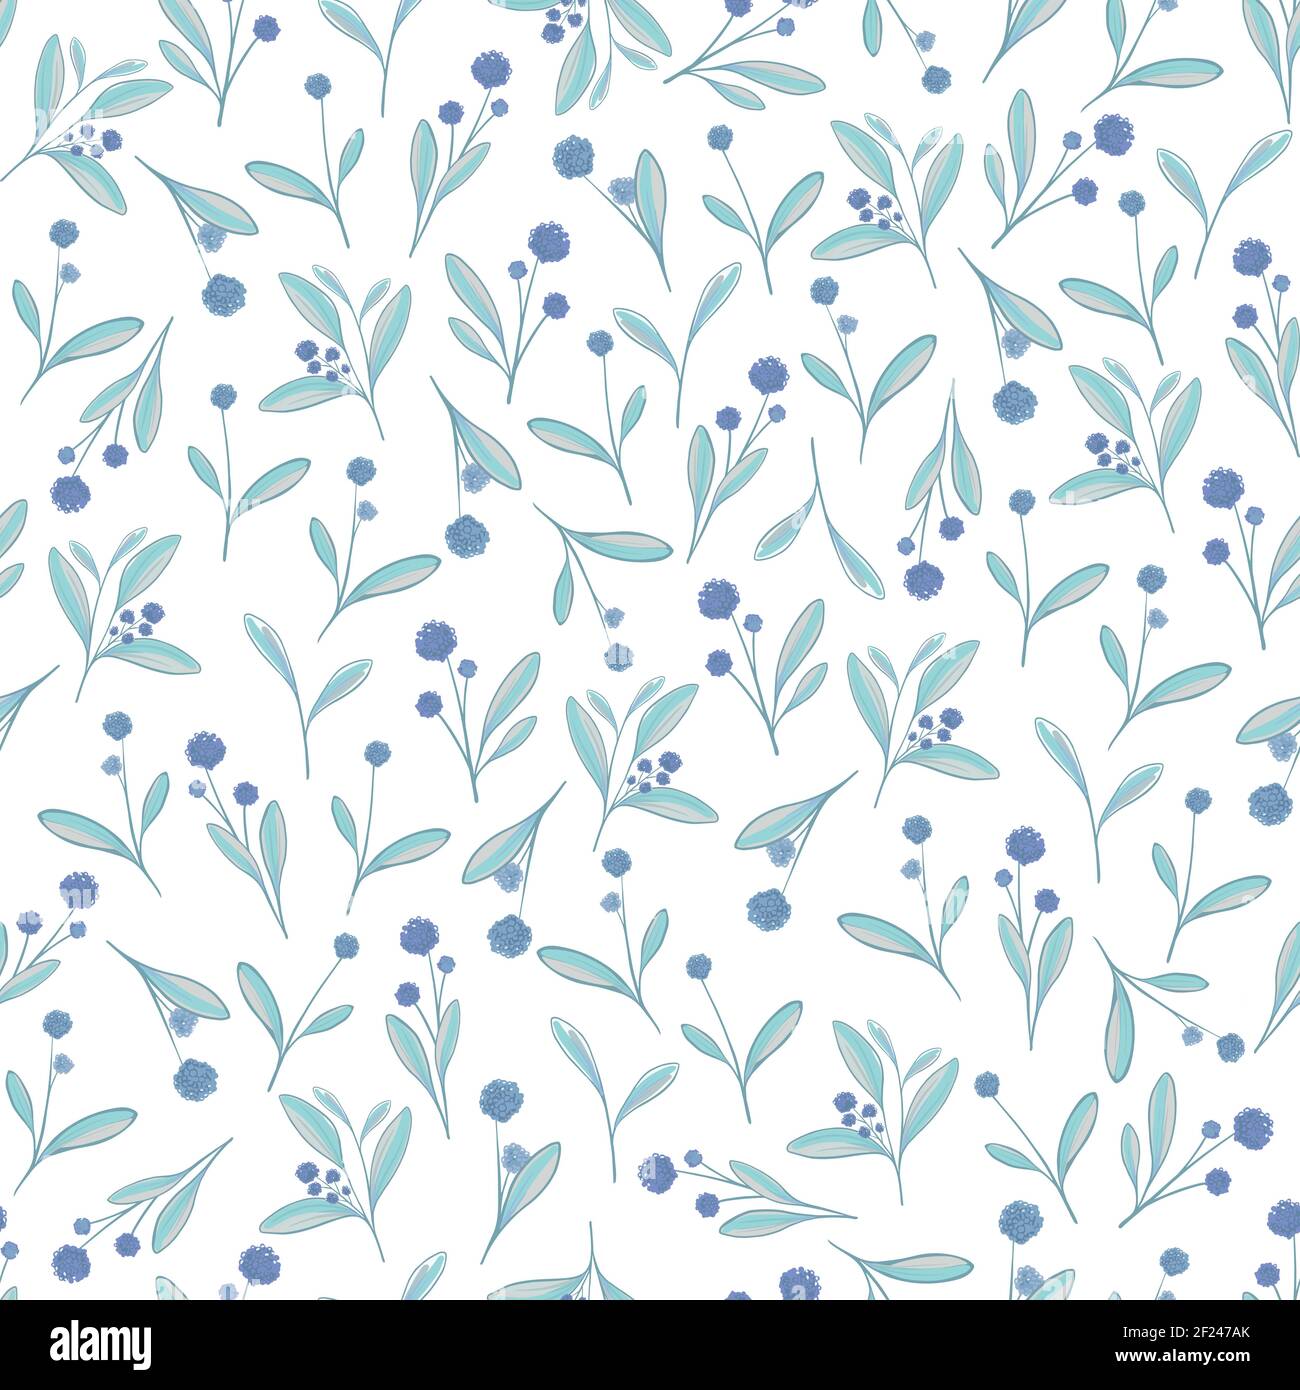 https://c8.alamy.com/comp/2F247AK/delicate-floral-vector-pattern-delicate-mint-colored-flowers-with-lilac-flowers-or-berries-2F247AK.jpg